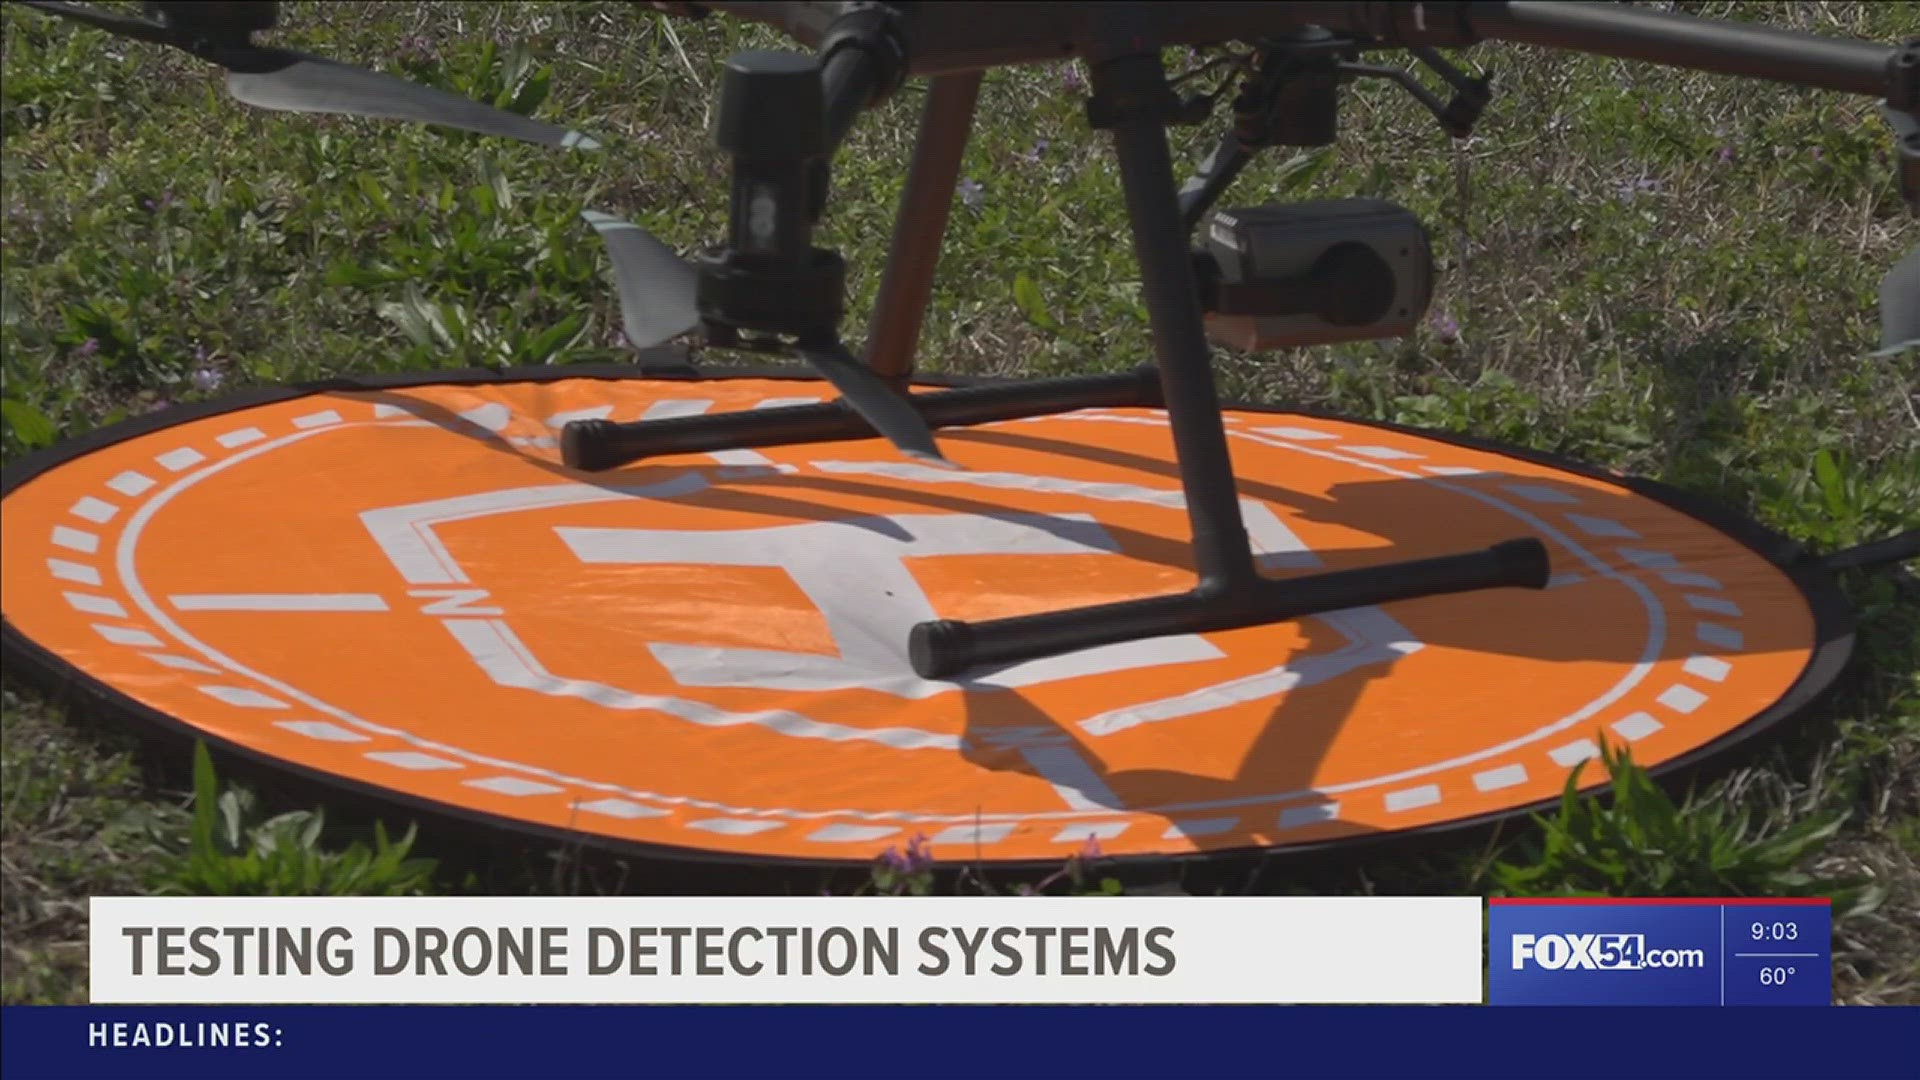 Huntsville International Airport is one of five airports testing drone detection systems for the FAA.